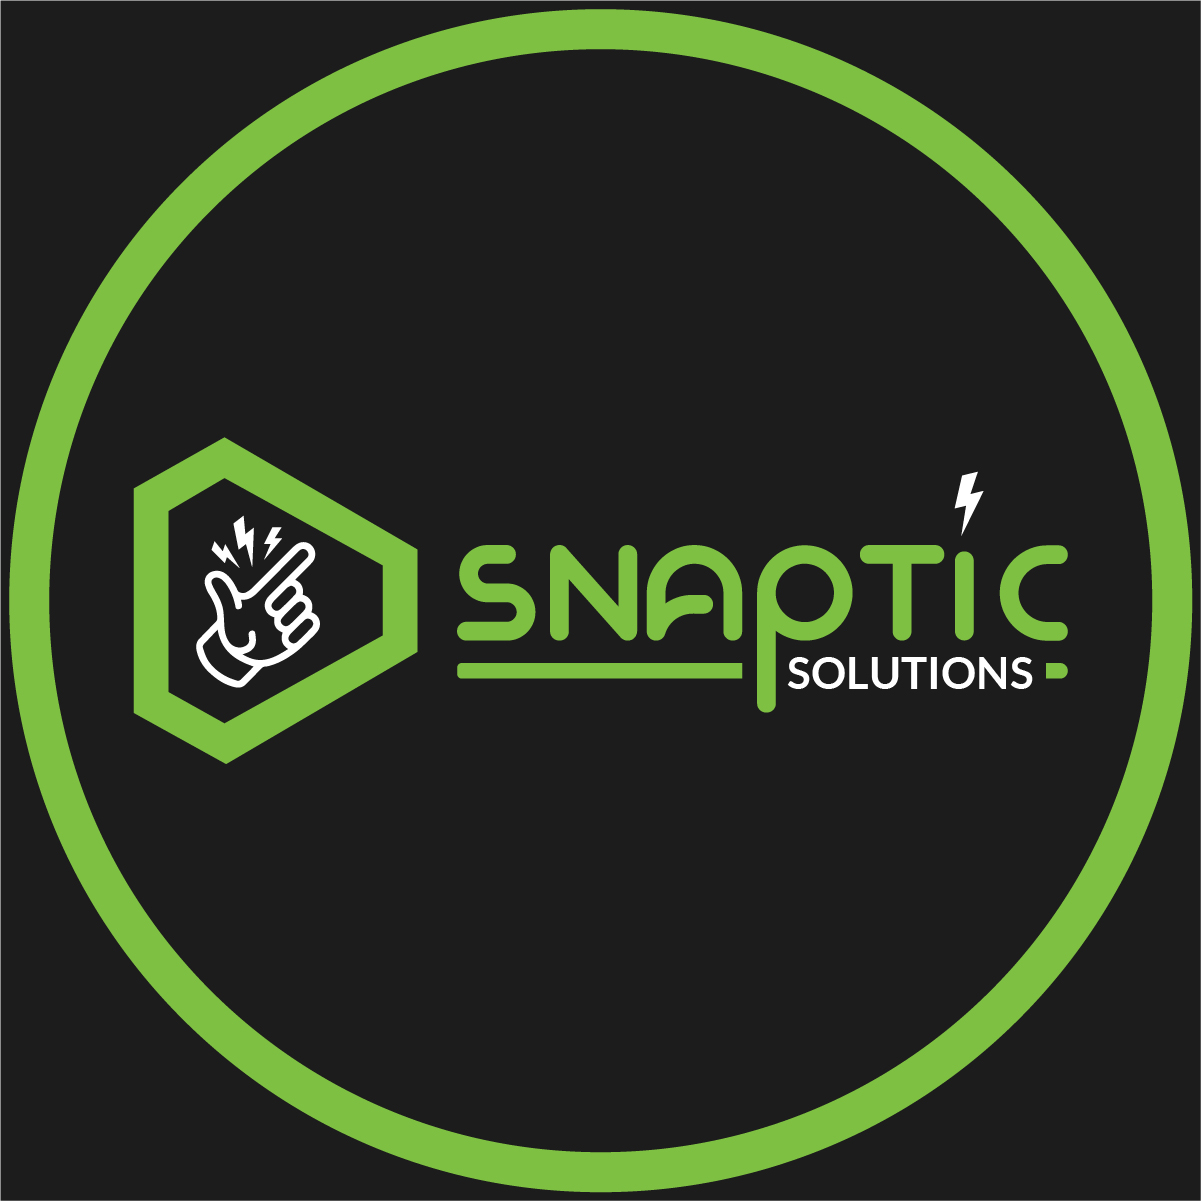 Snaptic Solutions|Architect|Professional Services